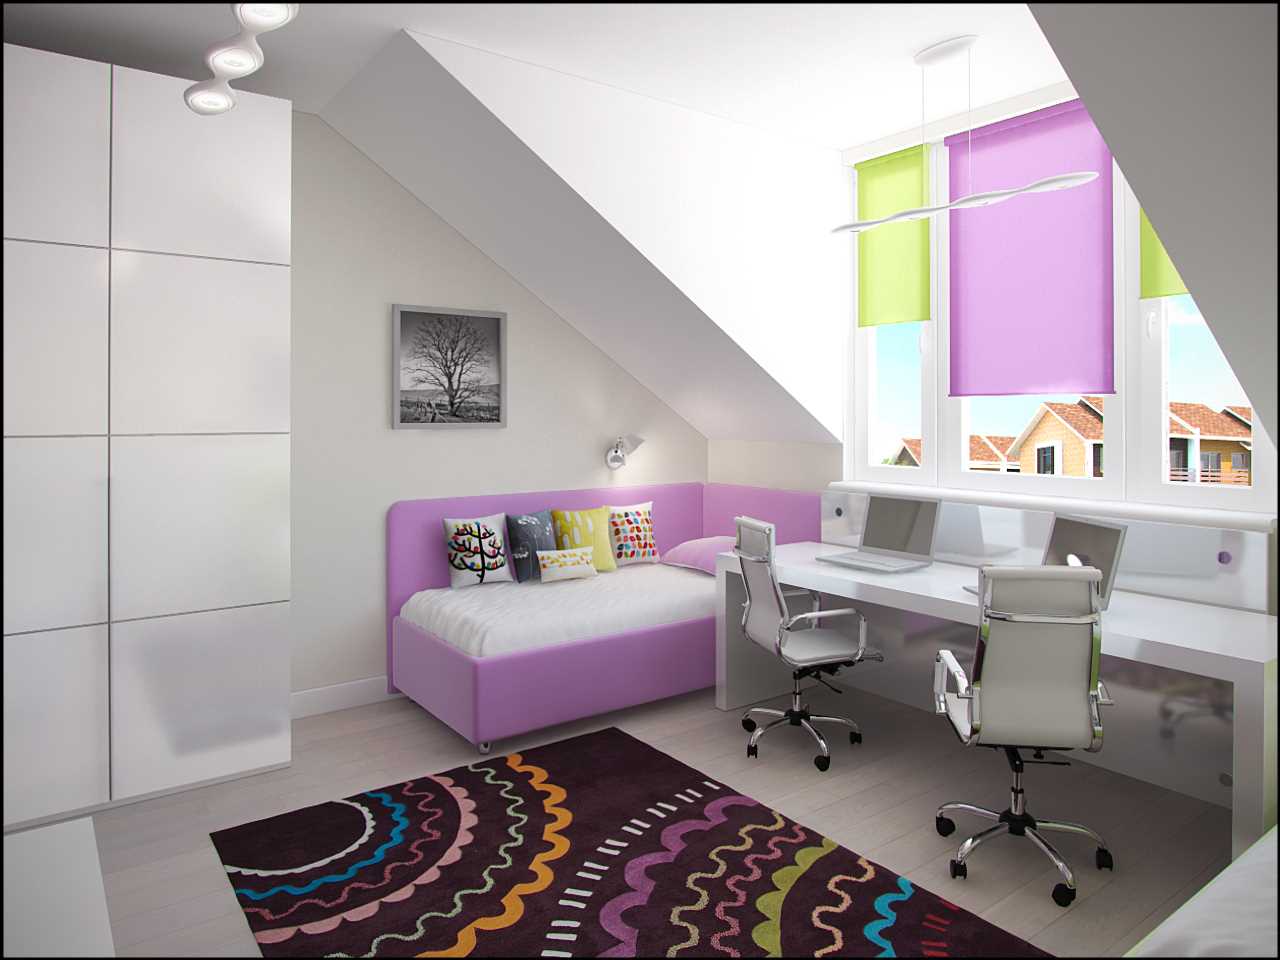 variant of a bright modern interior of a children's room